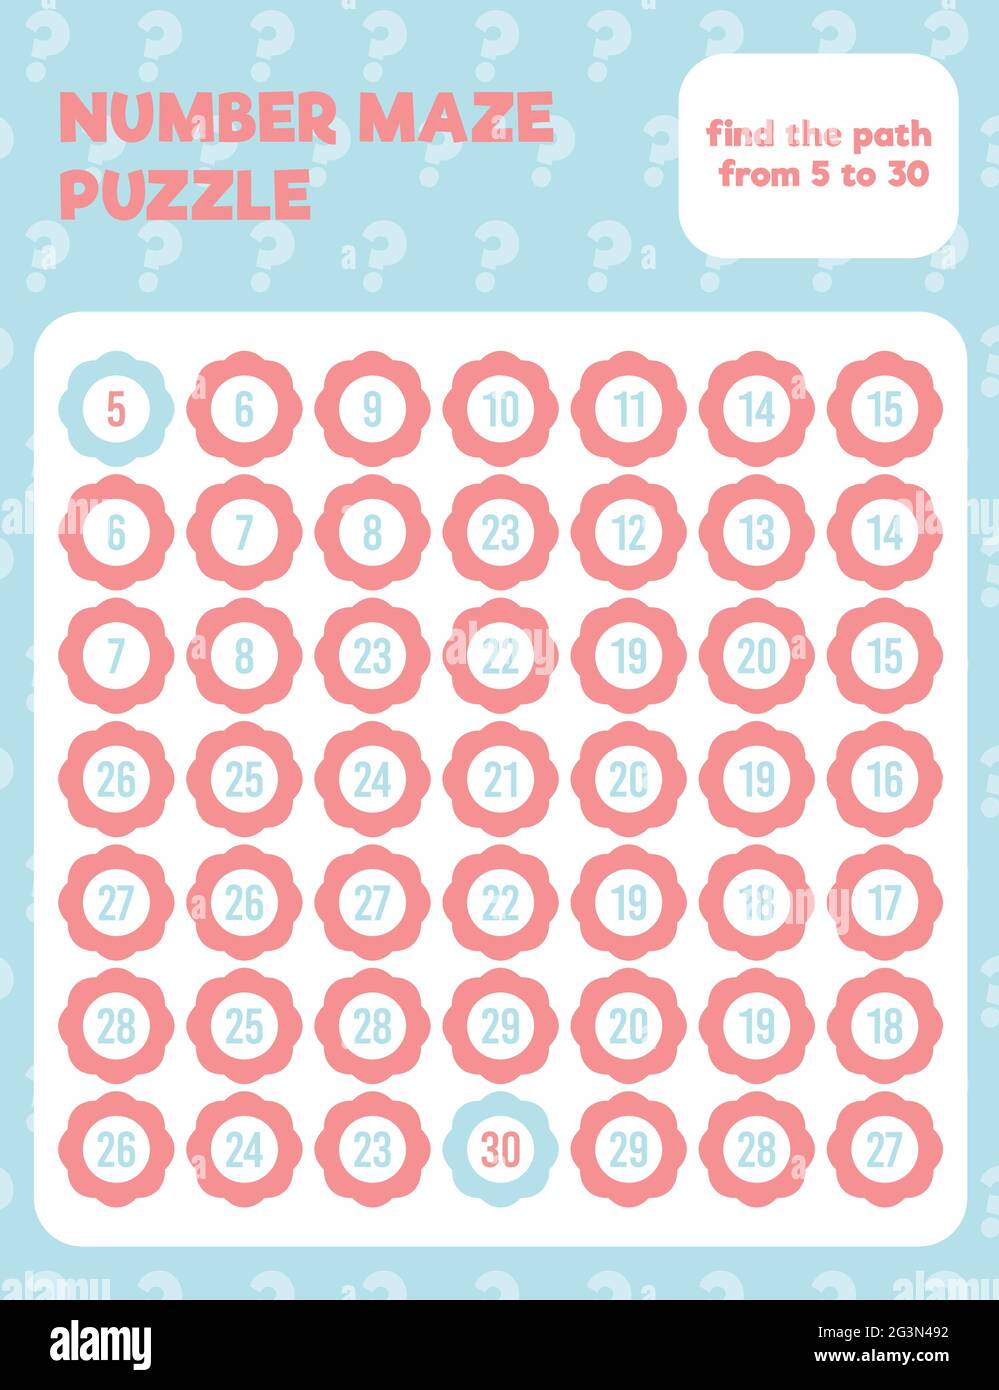 Math number maze puzzle. Prinatble math worksheet page. Easy colorful math worksheet practice for kids in preschool, elementary and middle school. Stock Vector